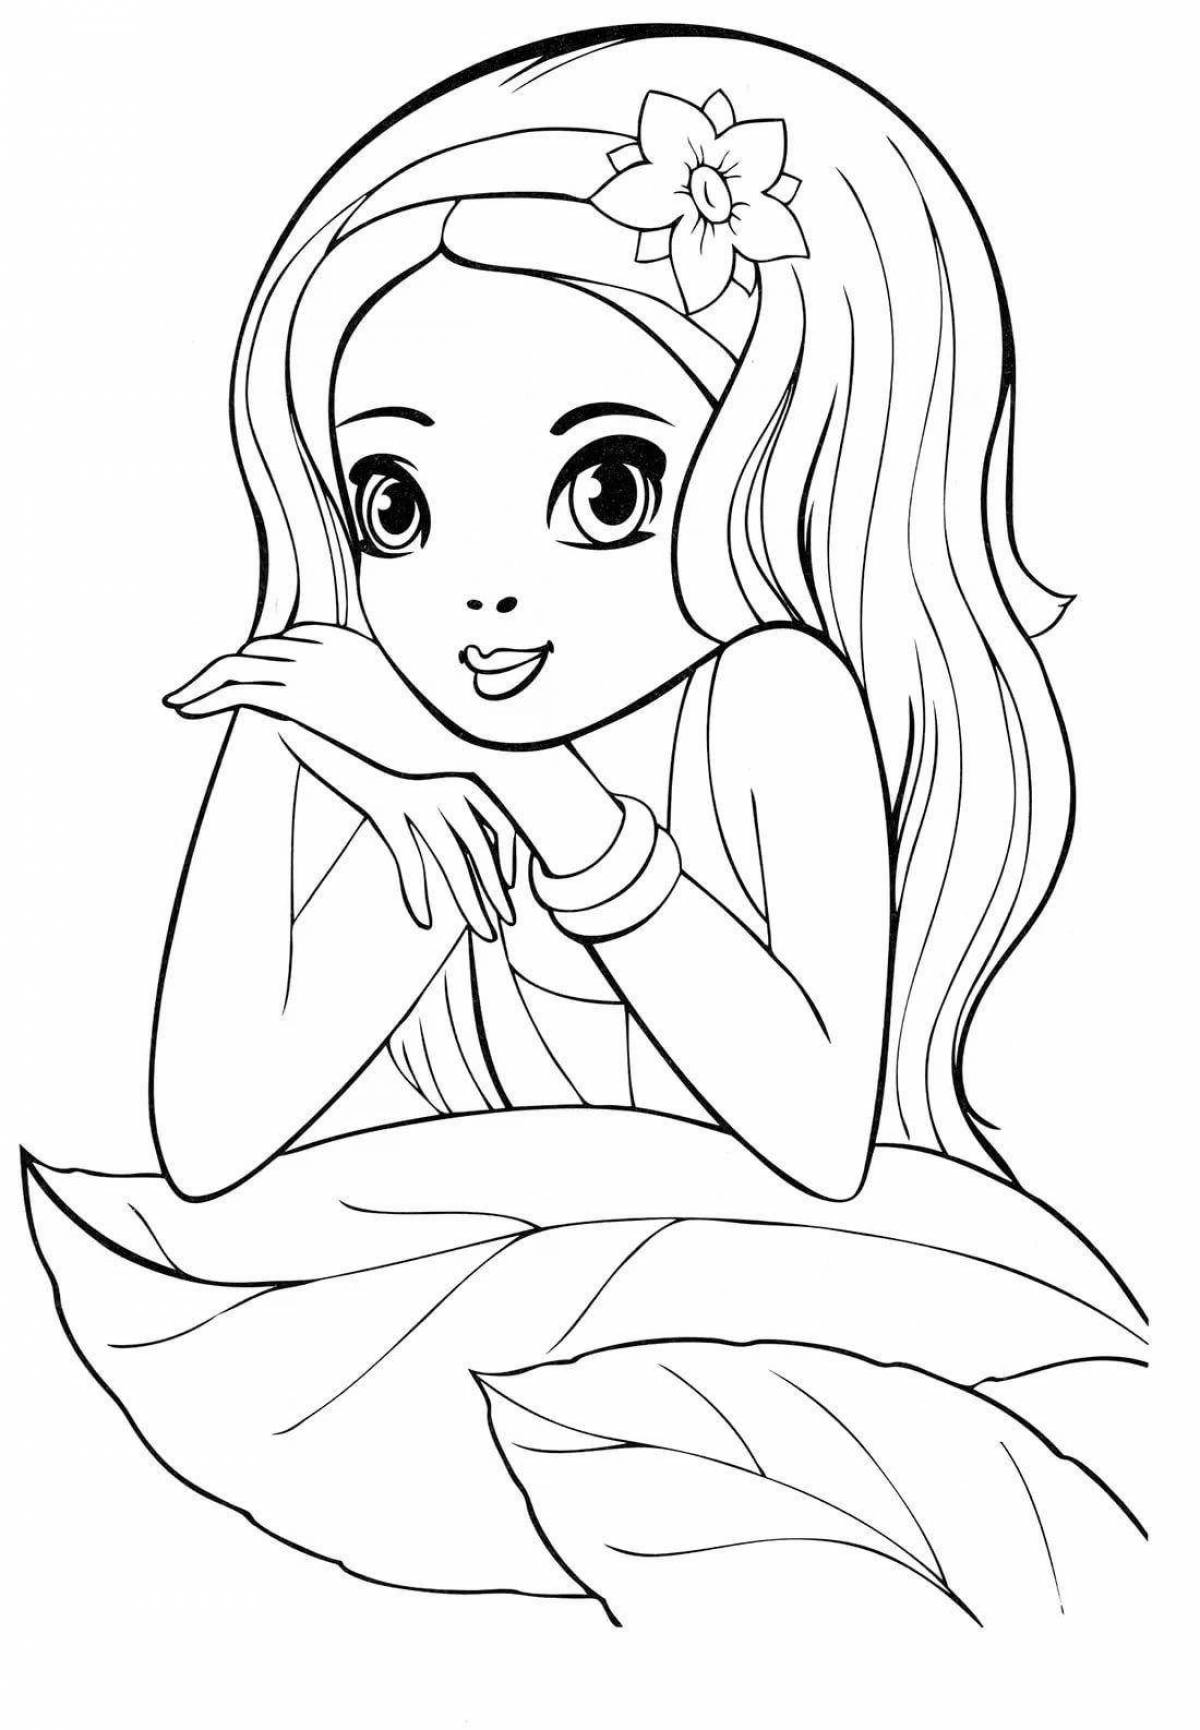 Exciting coloring pages coloring pages